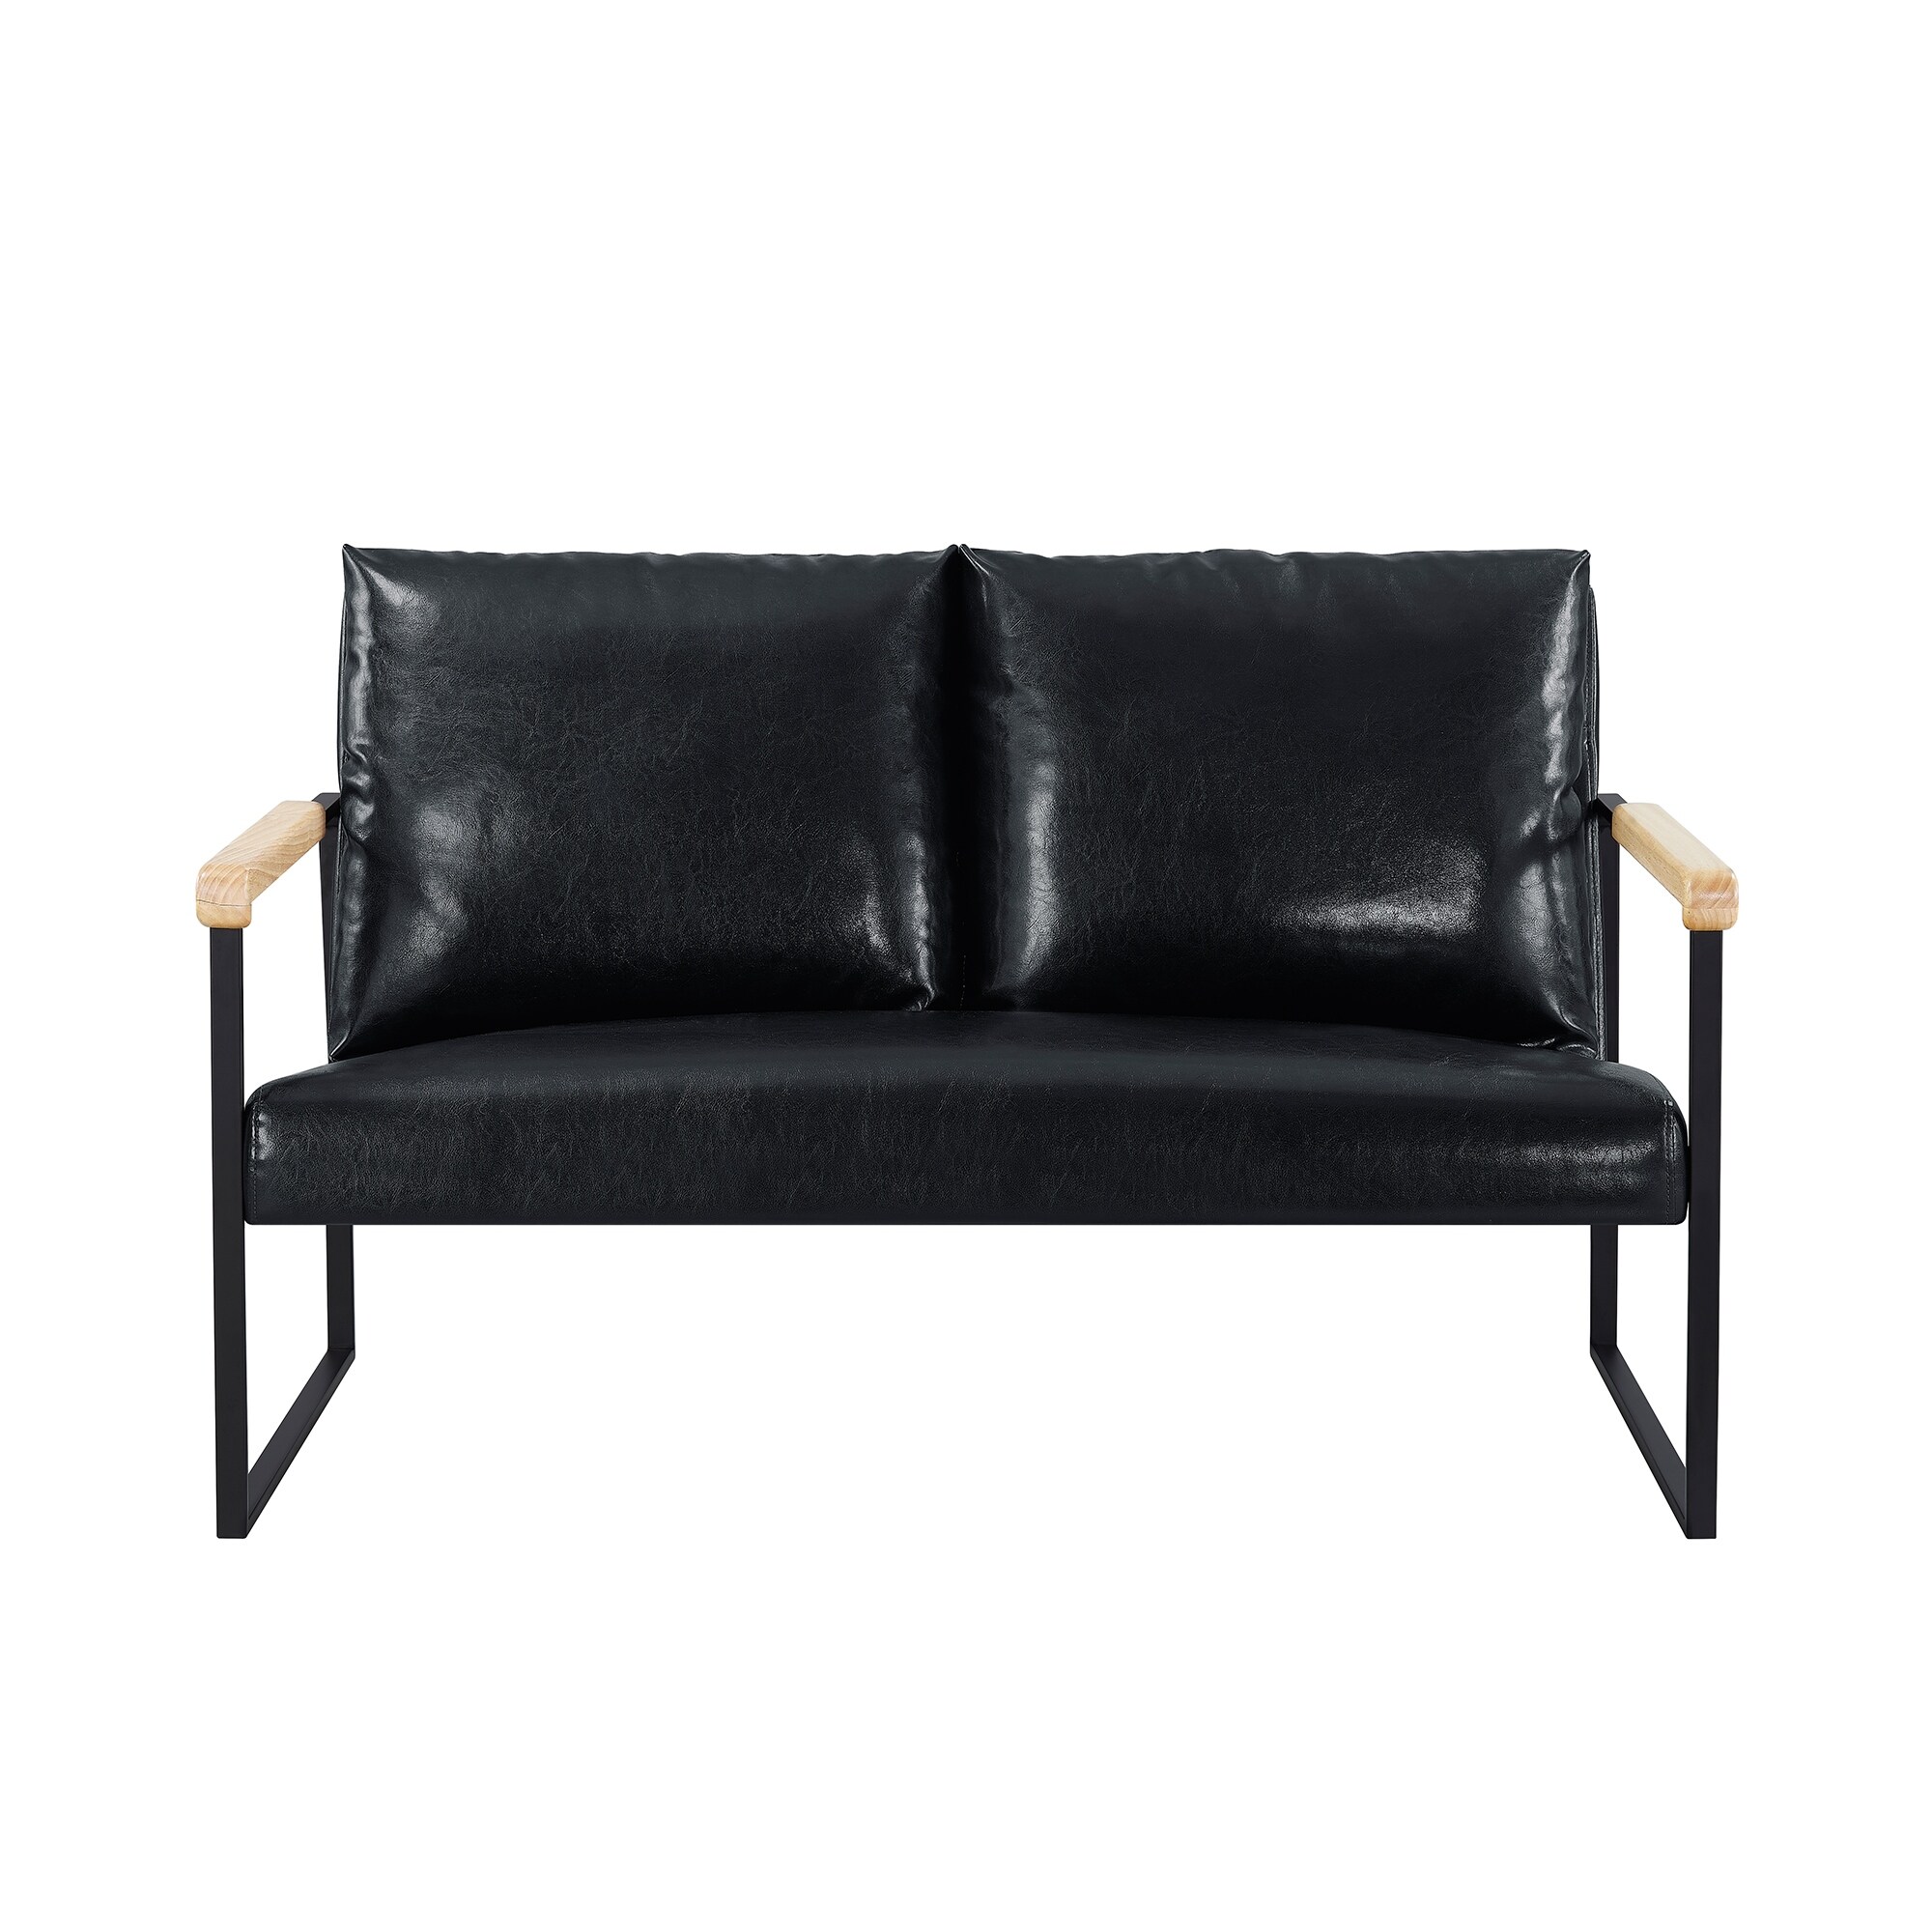 Mid-Century Industrial Stylish Classic Leather Loveseat Living Room Accent Chair Arm Chairs - Dark Brown